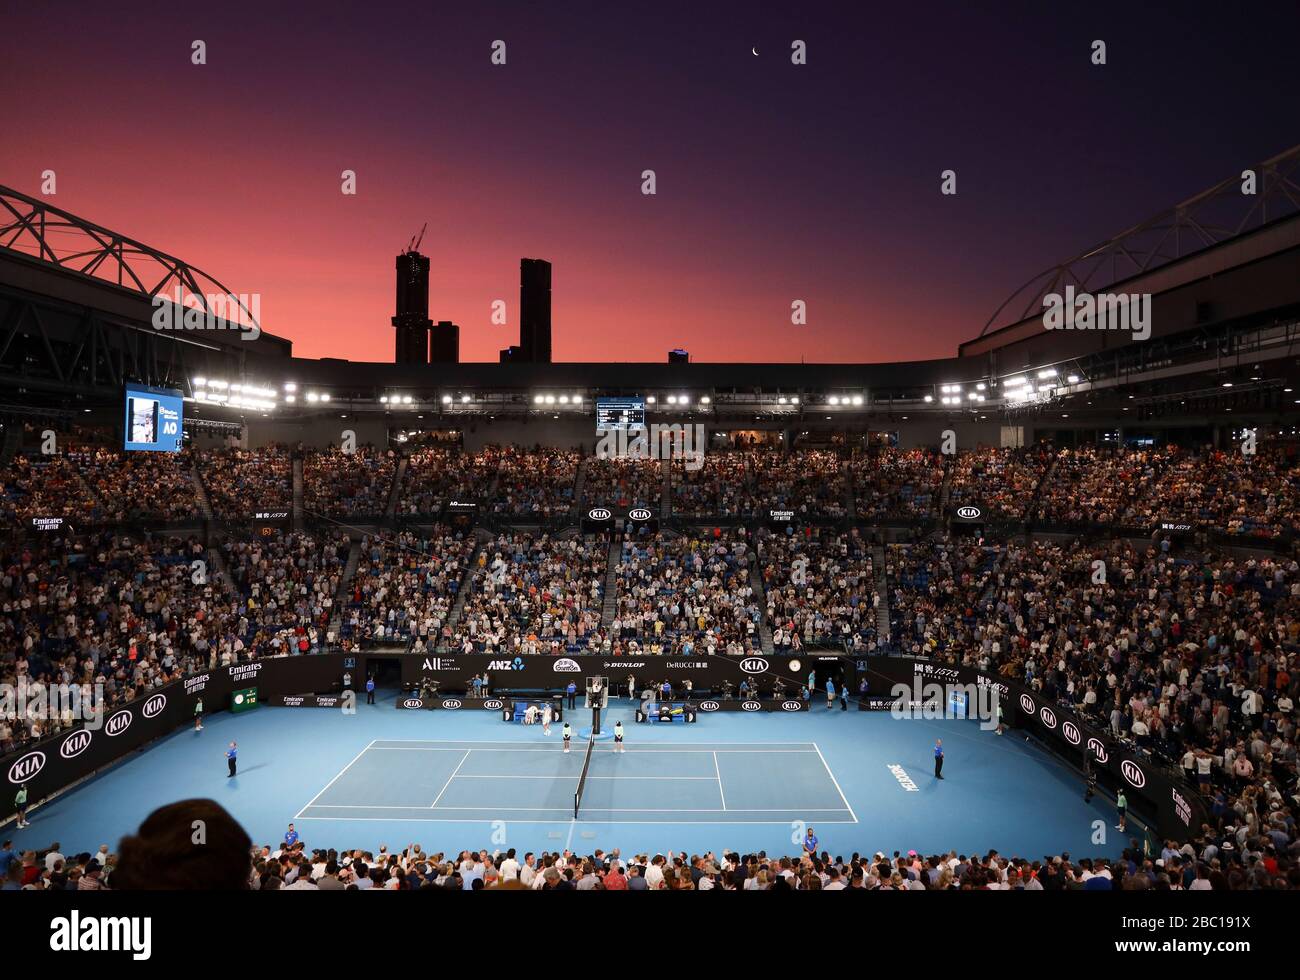 Panorama View Of Rod Laver Arena At Sunset During Men S Semi Final At The Australian Open 2020